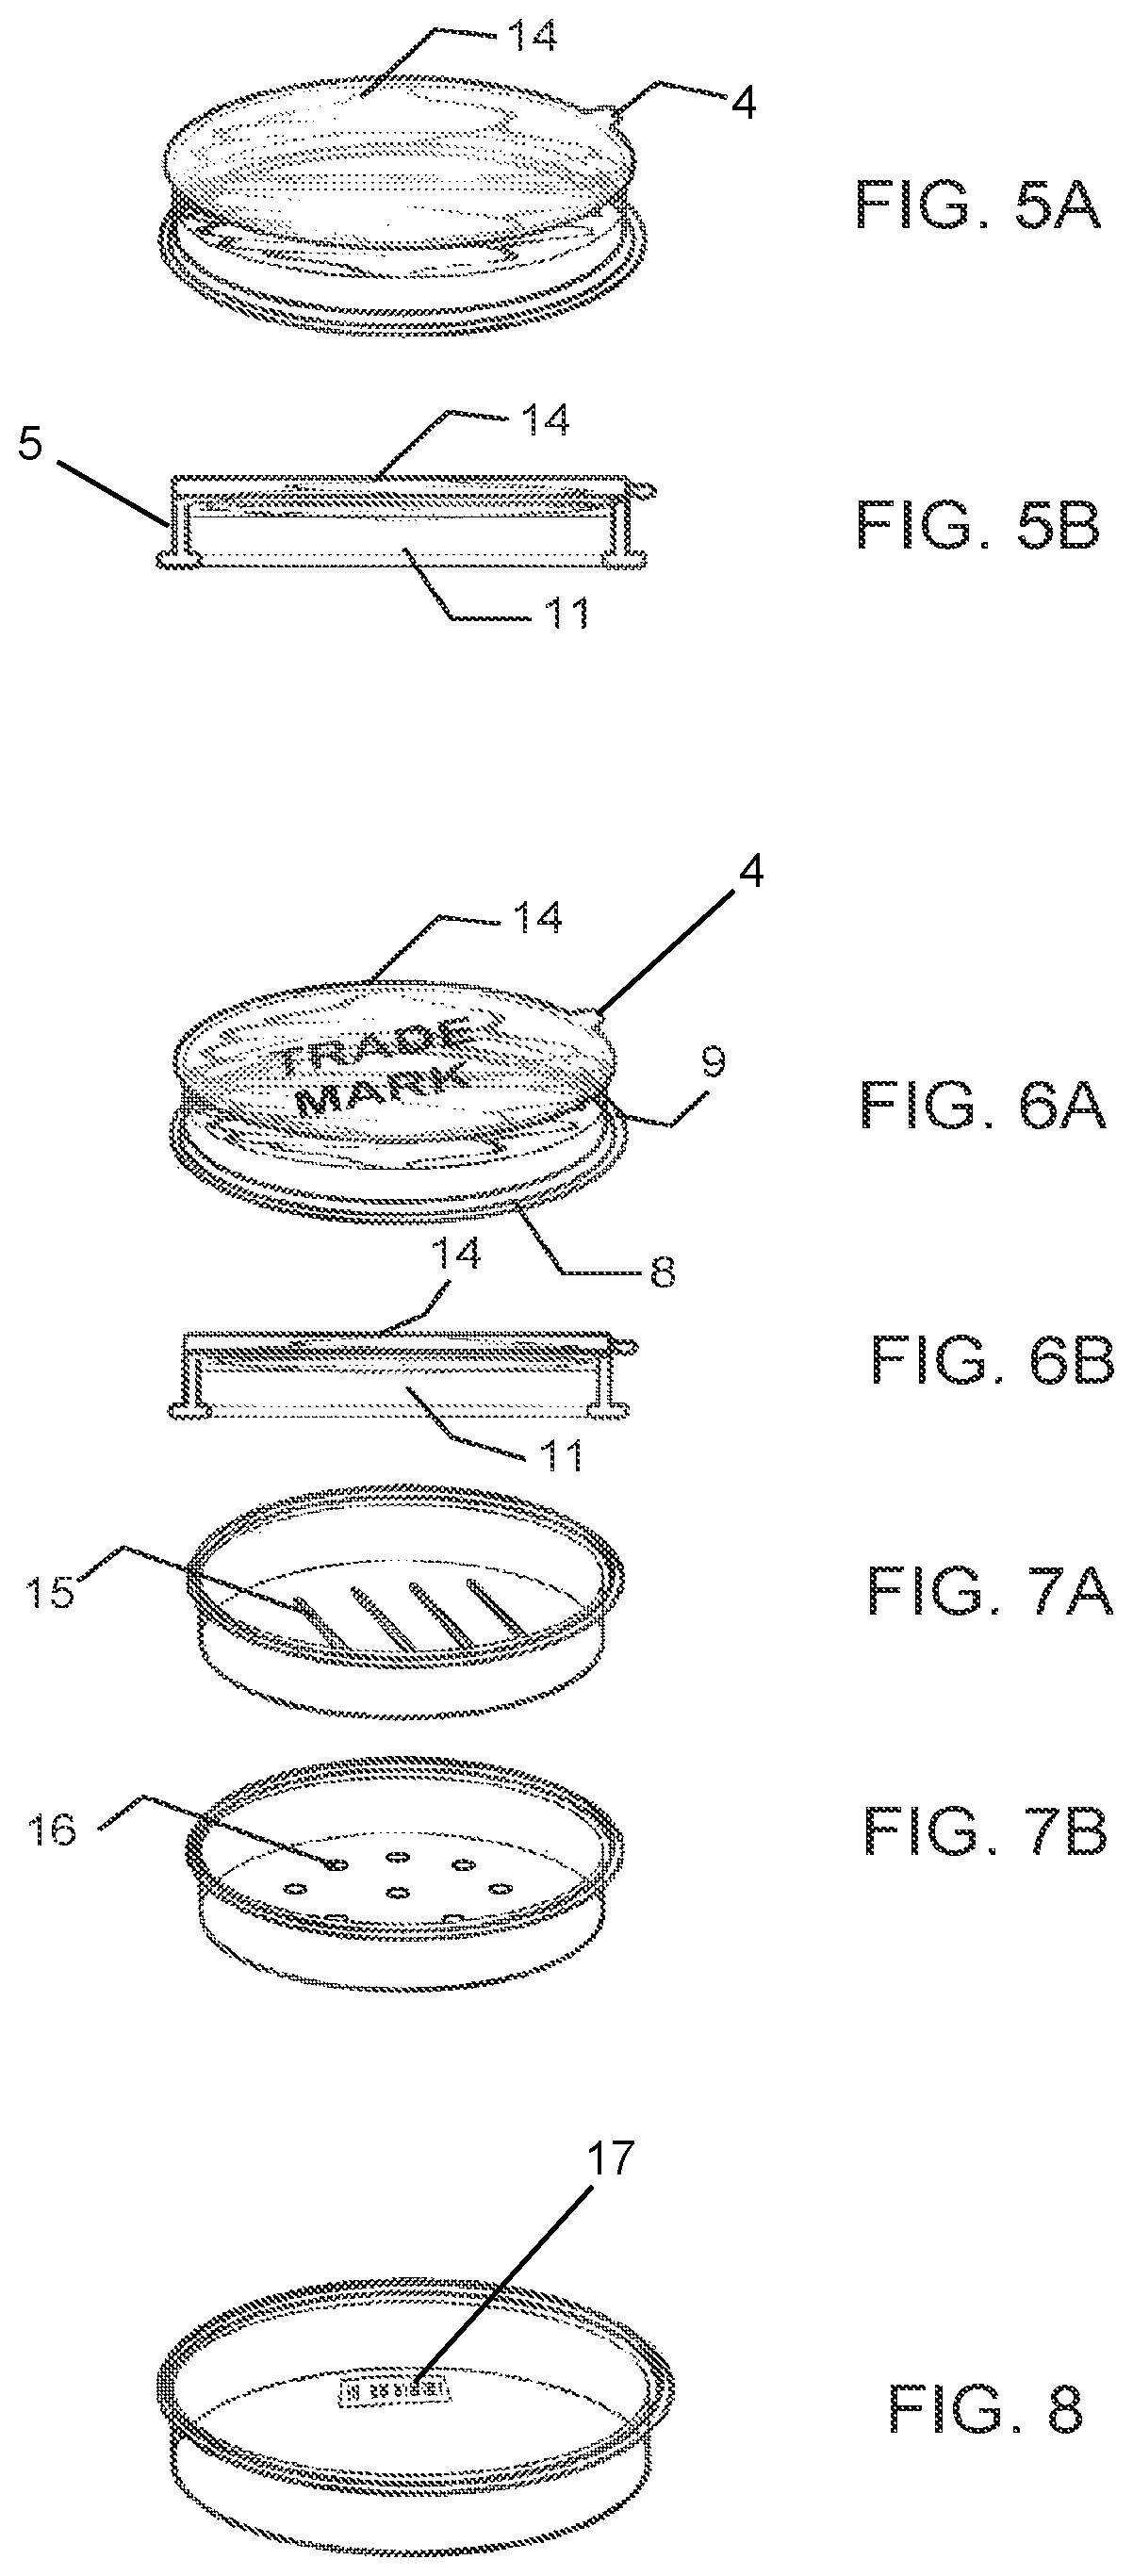 Disposable product cap and assembly having a manually usable thermo-optical device for skin care